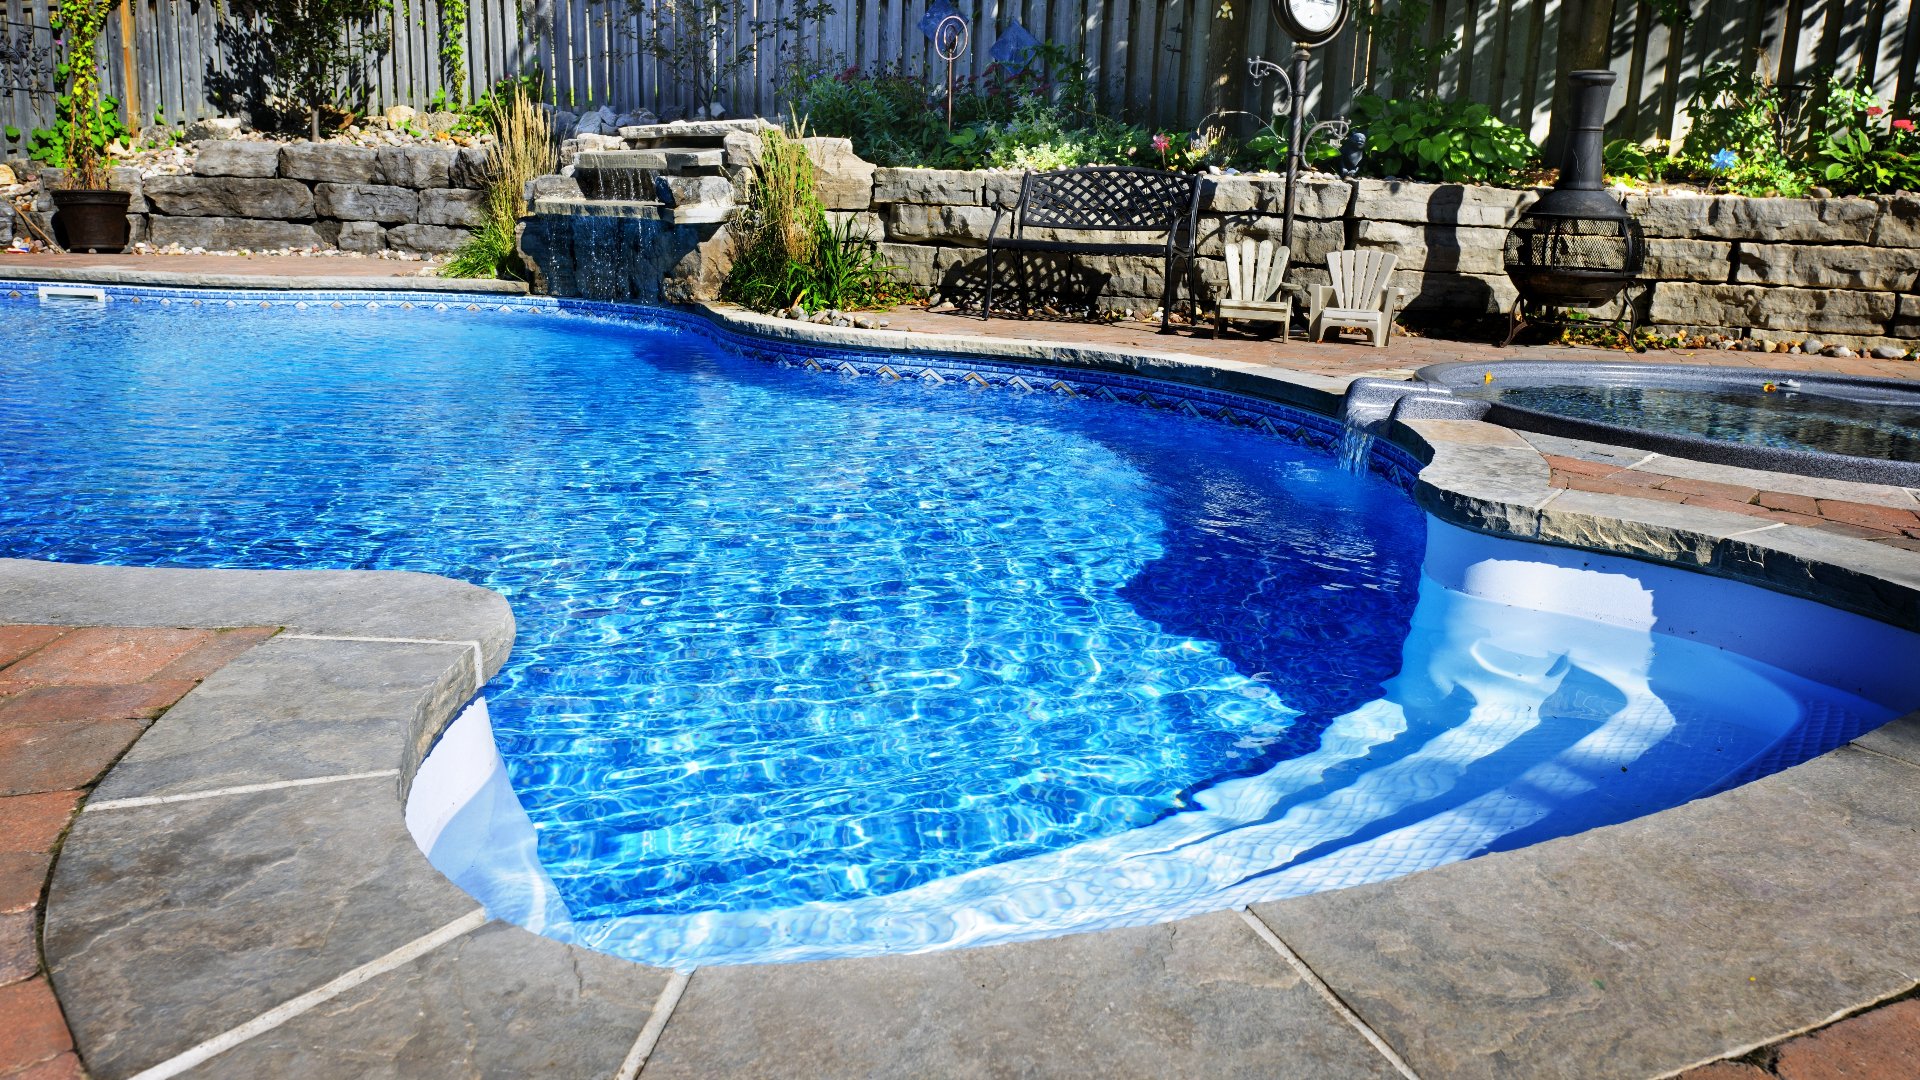 Is Fiberglass the Right Choice for Your New Pool?